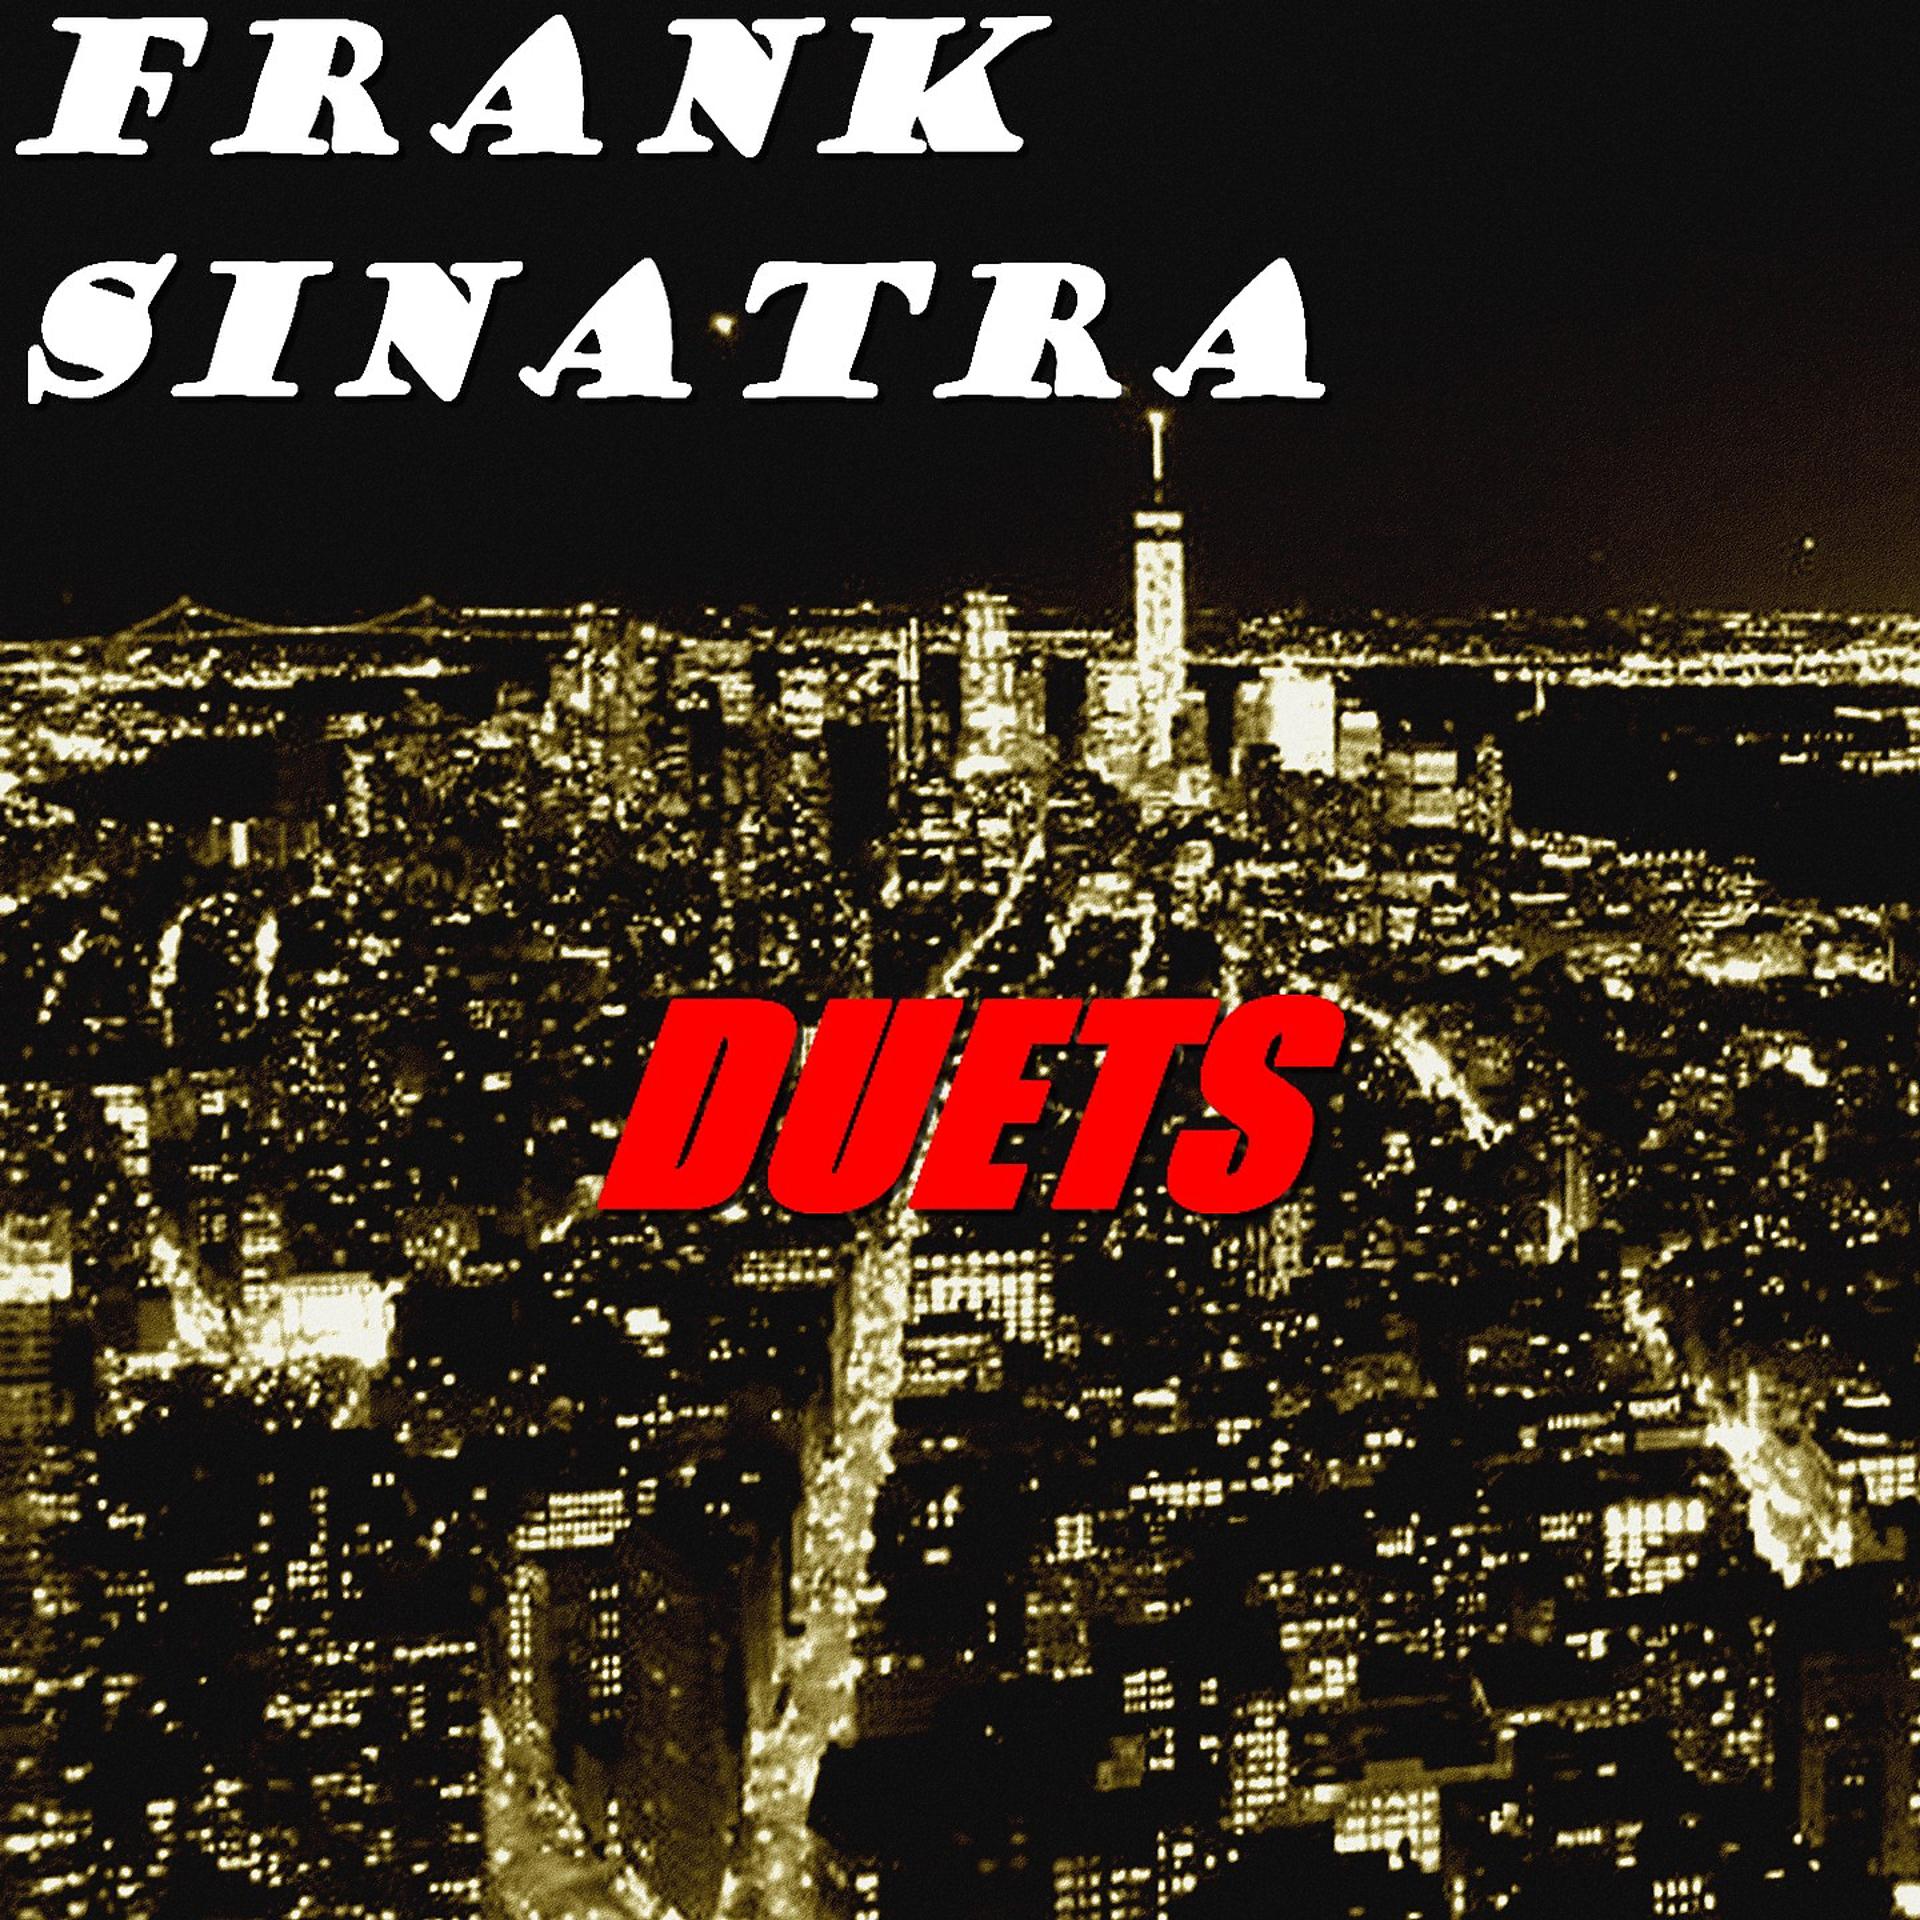 Фрэнк треки. Frank Sinatra "Duets". Frank Sinatra - the Birth of the Blues. Frank Sinatra - best of Duets. Sinatra and Louis Armstrong Birth of the Blues.